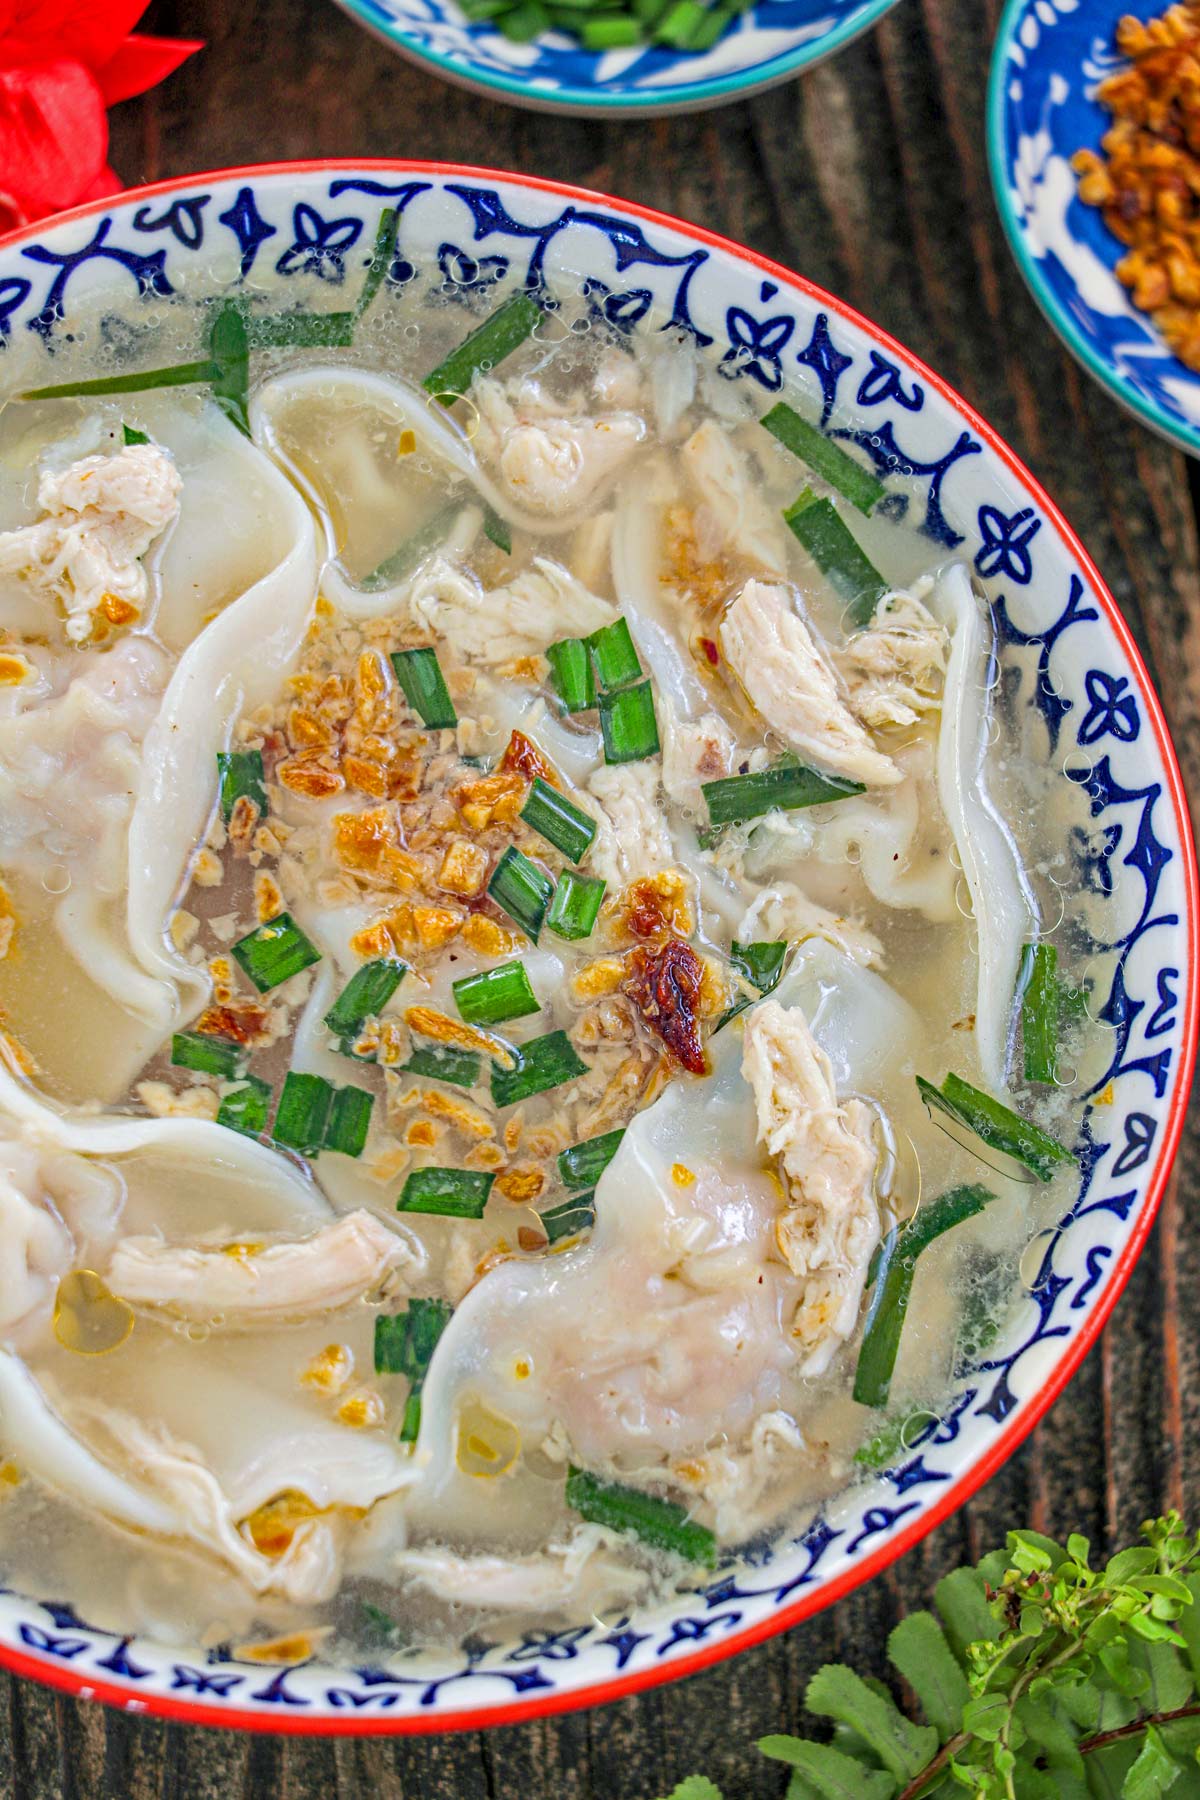 Pancit Molo, a soup dumpling with shredded chicken, toasted garlic and green onions, served on a bowl.